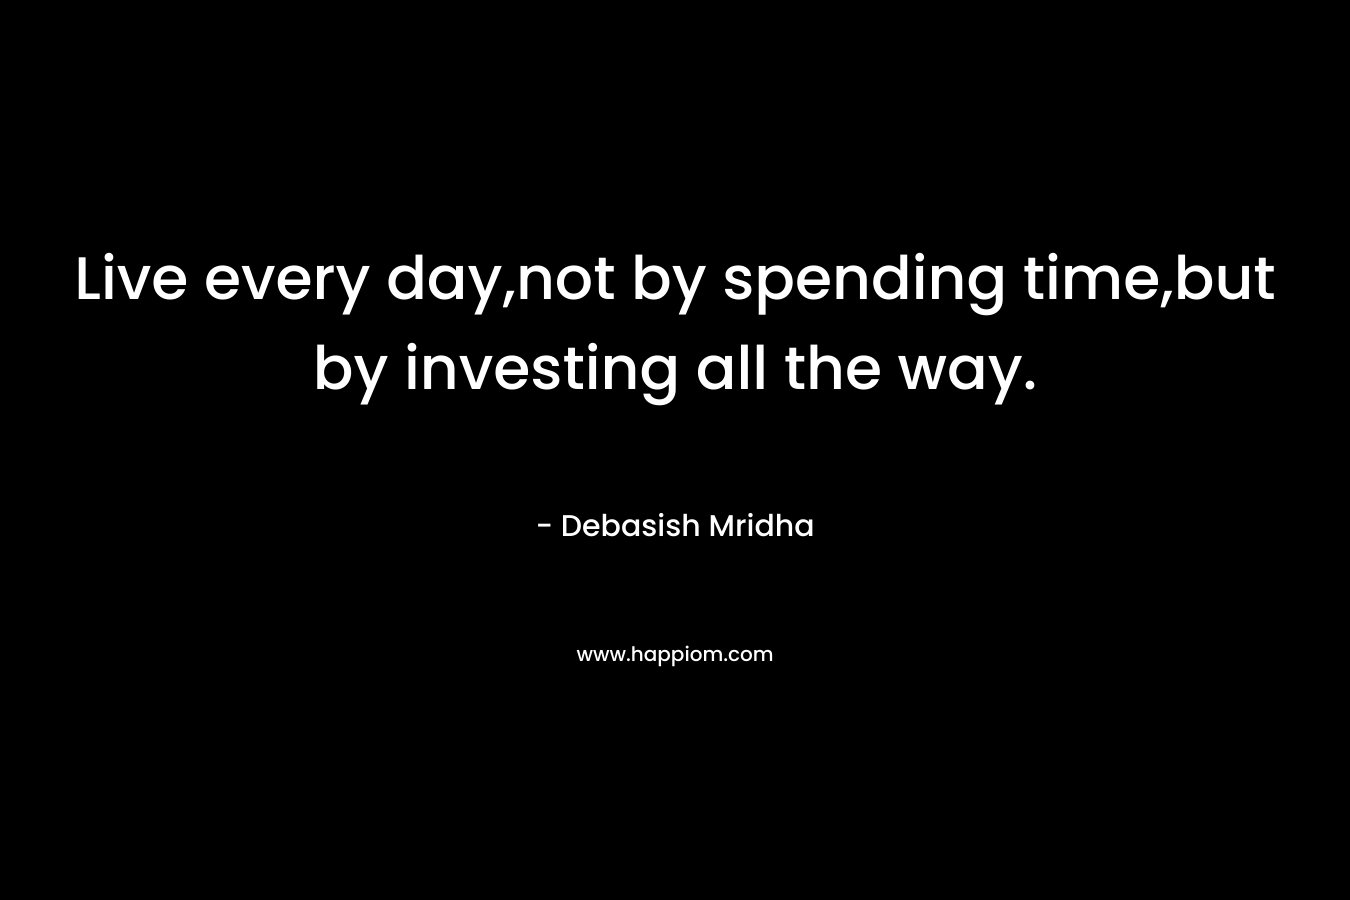 Live every day,not by spending time,but by investing all the way. – Debasish Mridha